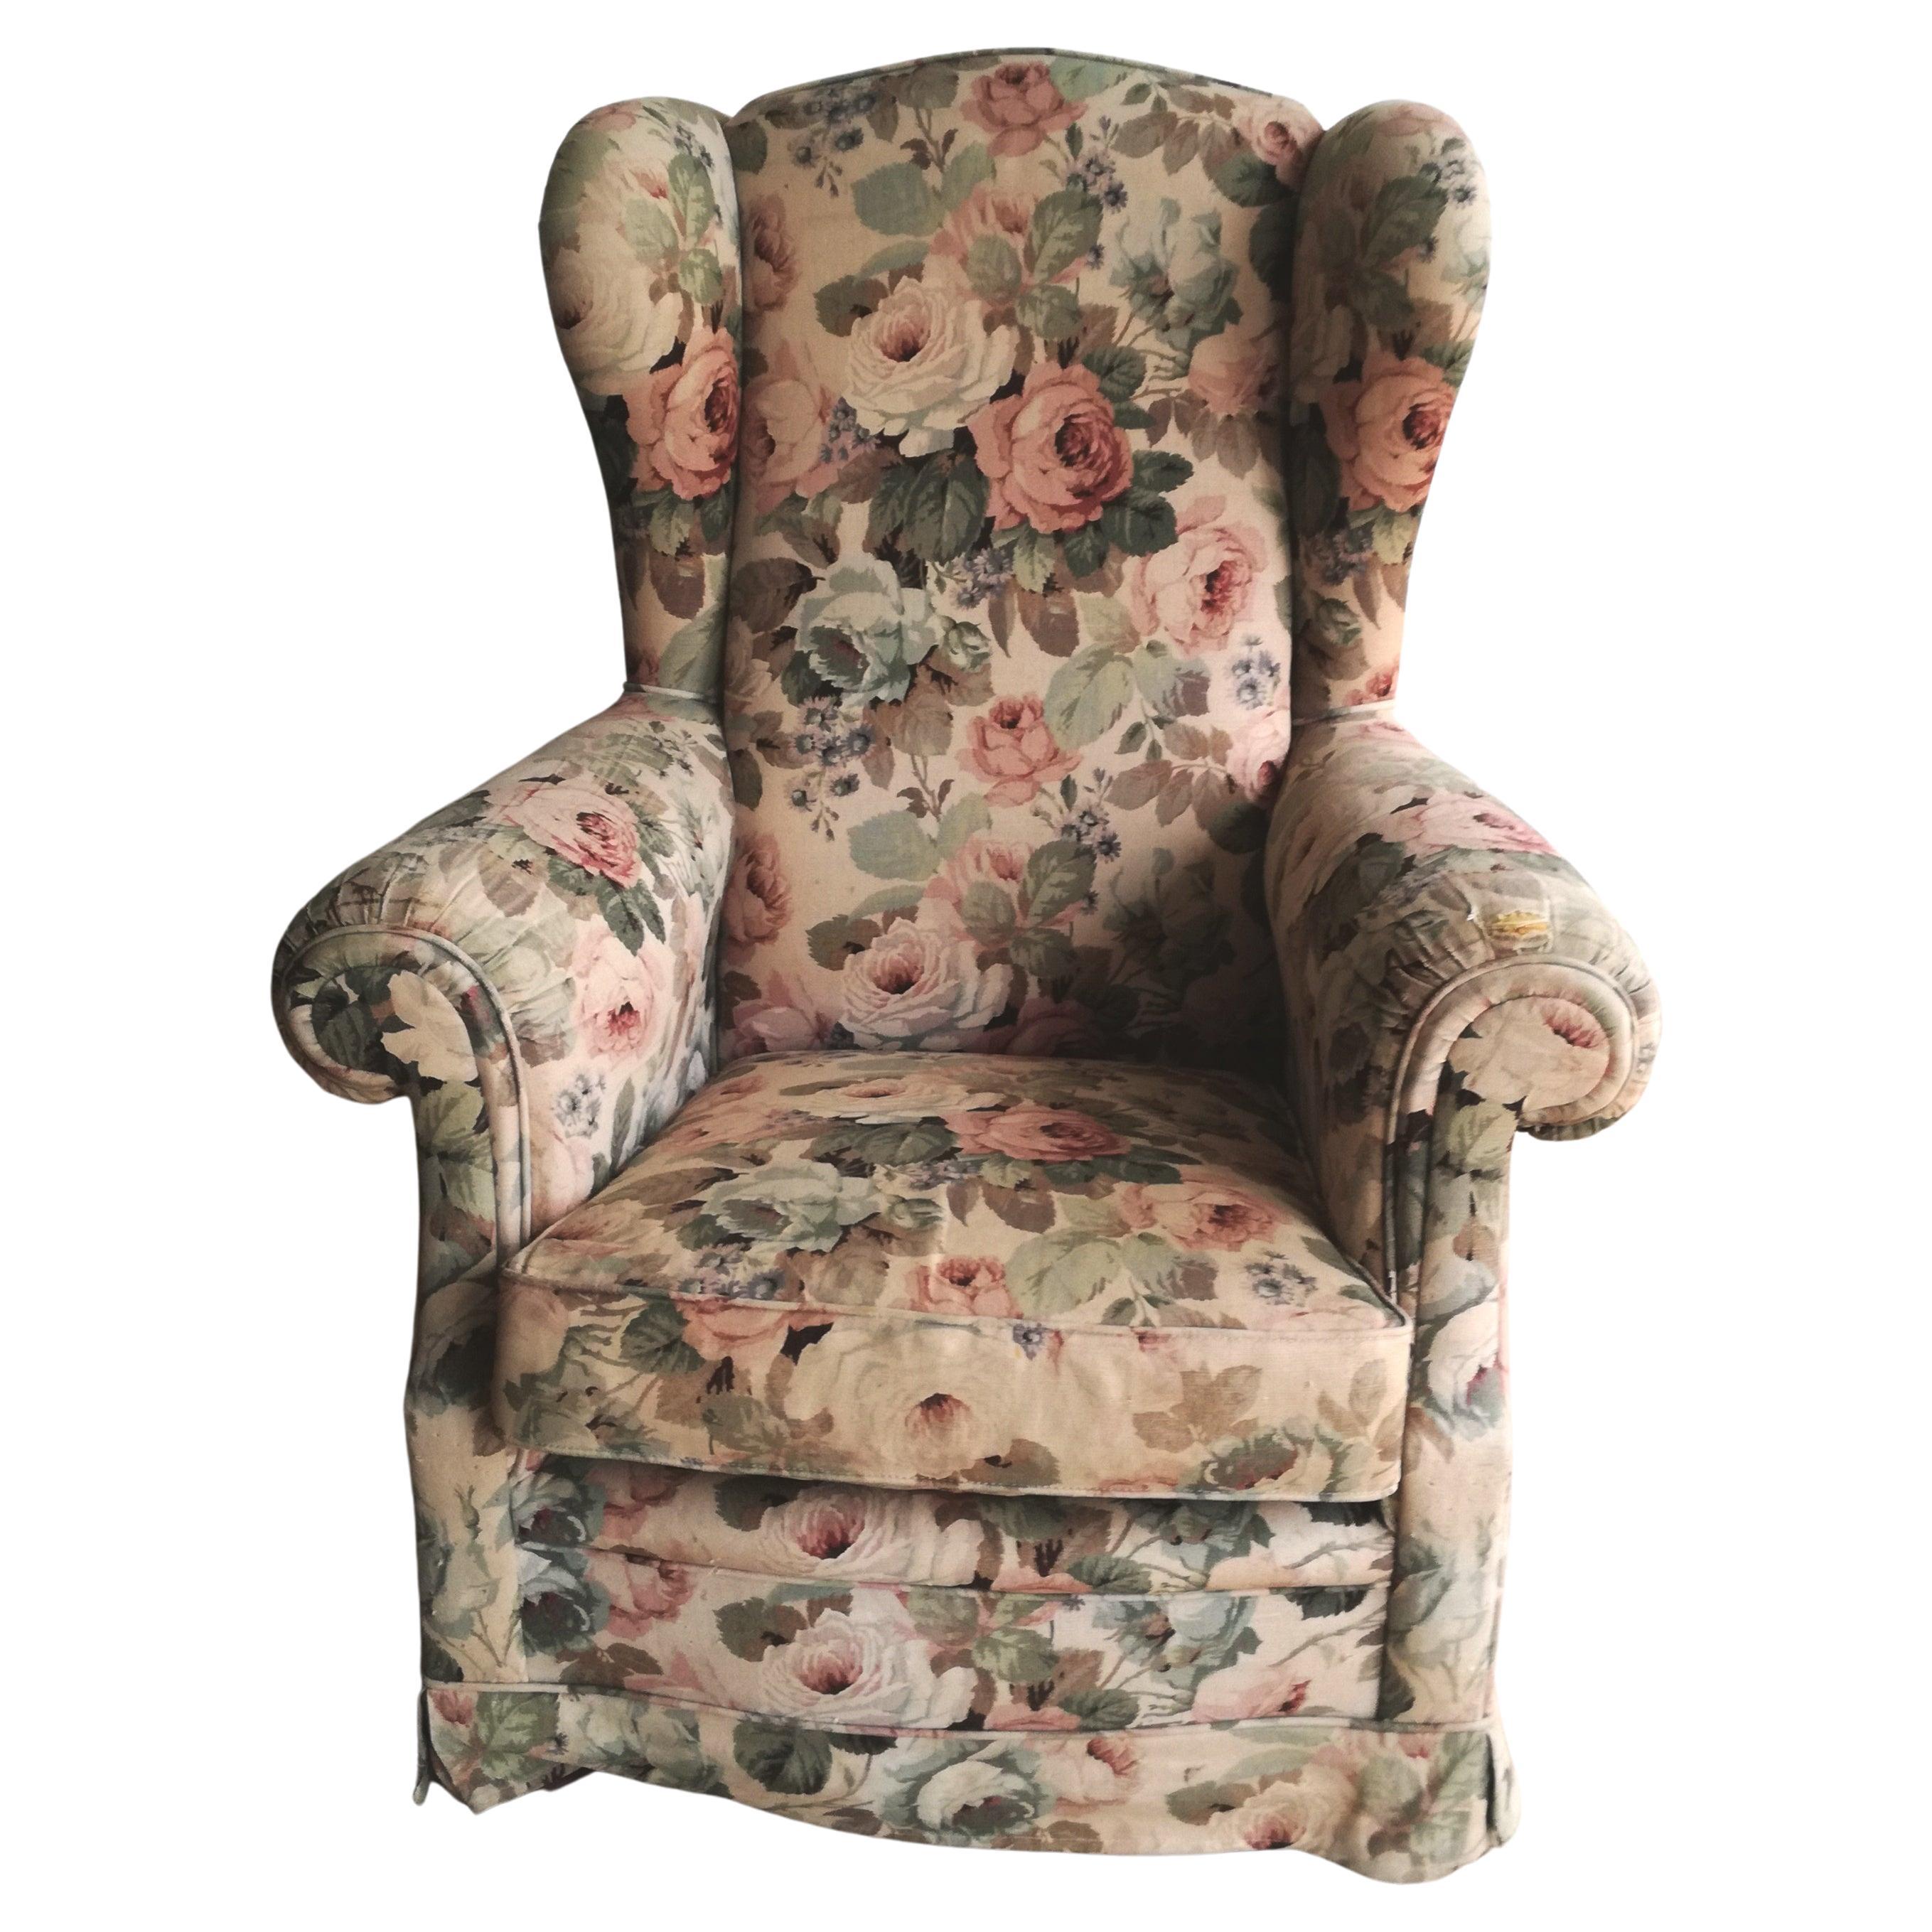 Poltrona Bergere in Tessuto Sanderson, Anni 70 For Sale at 1stDibs